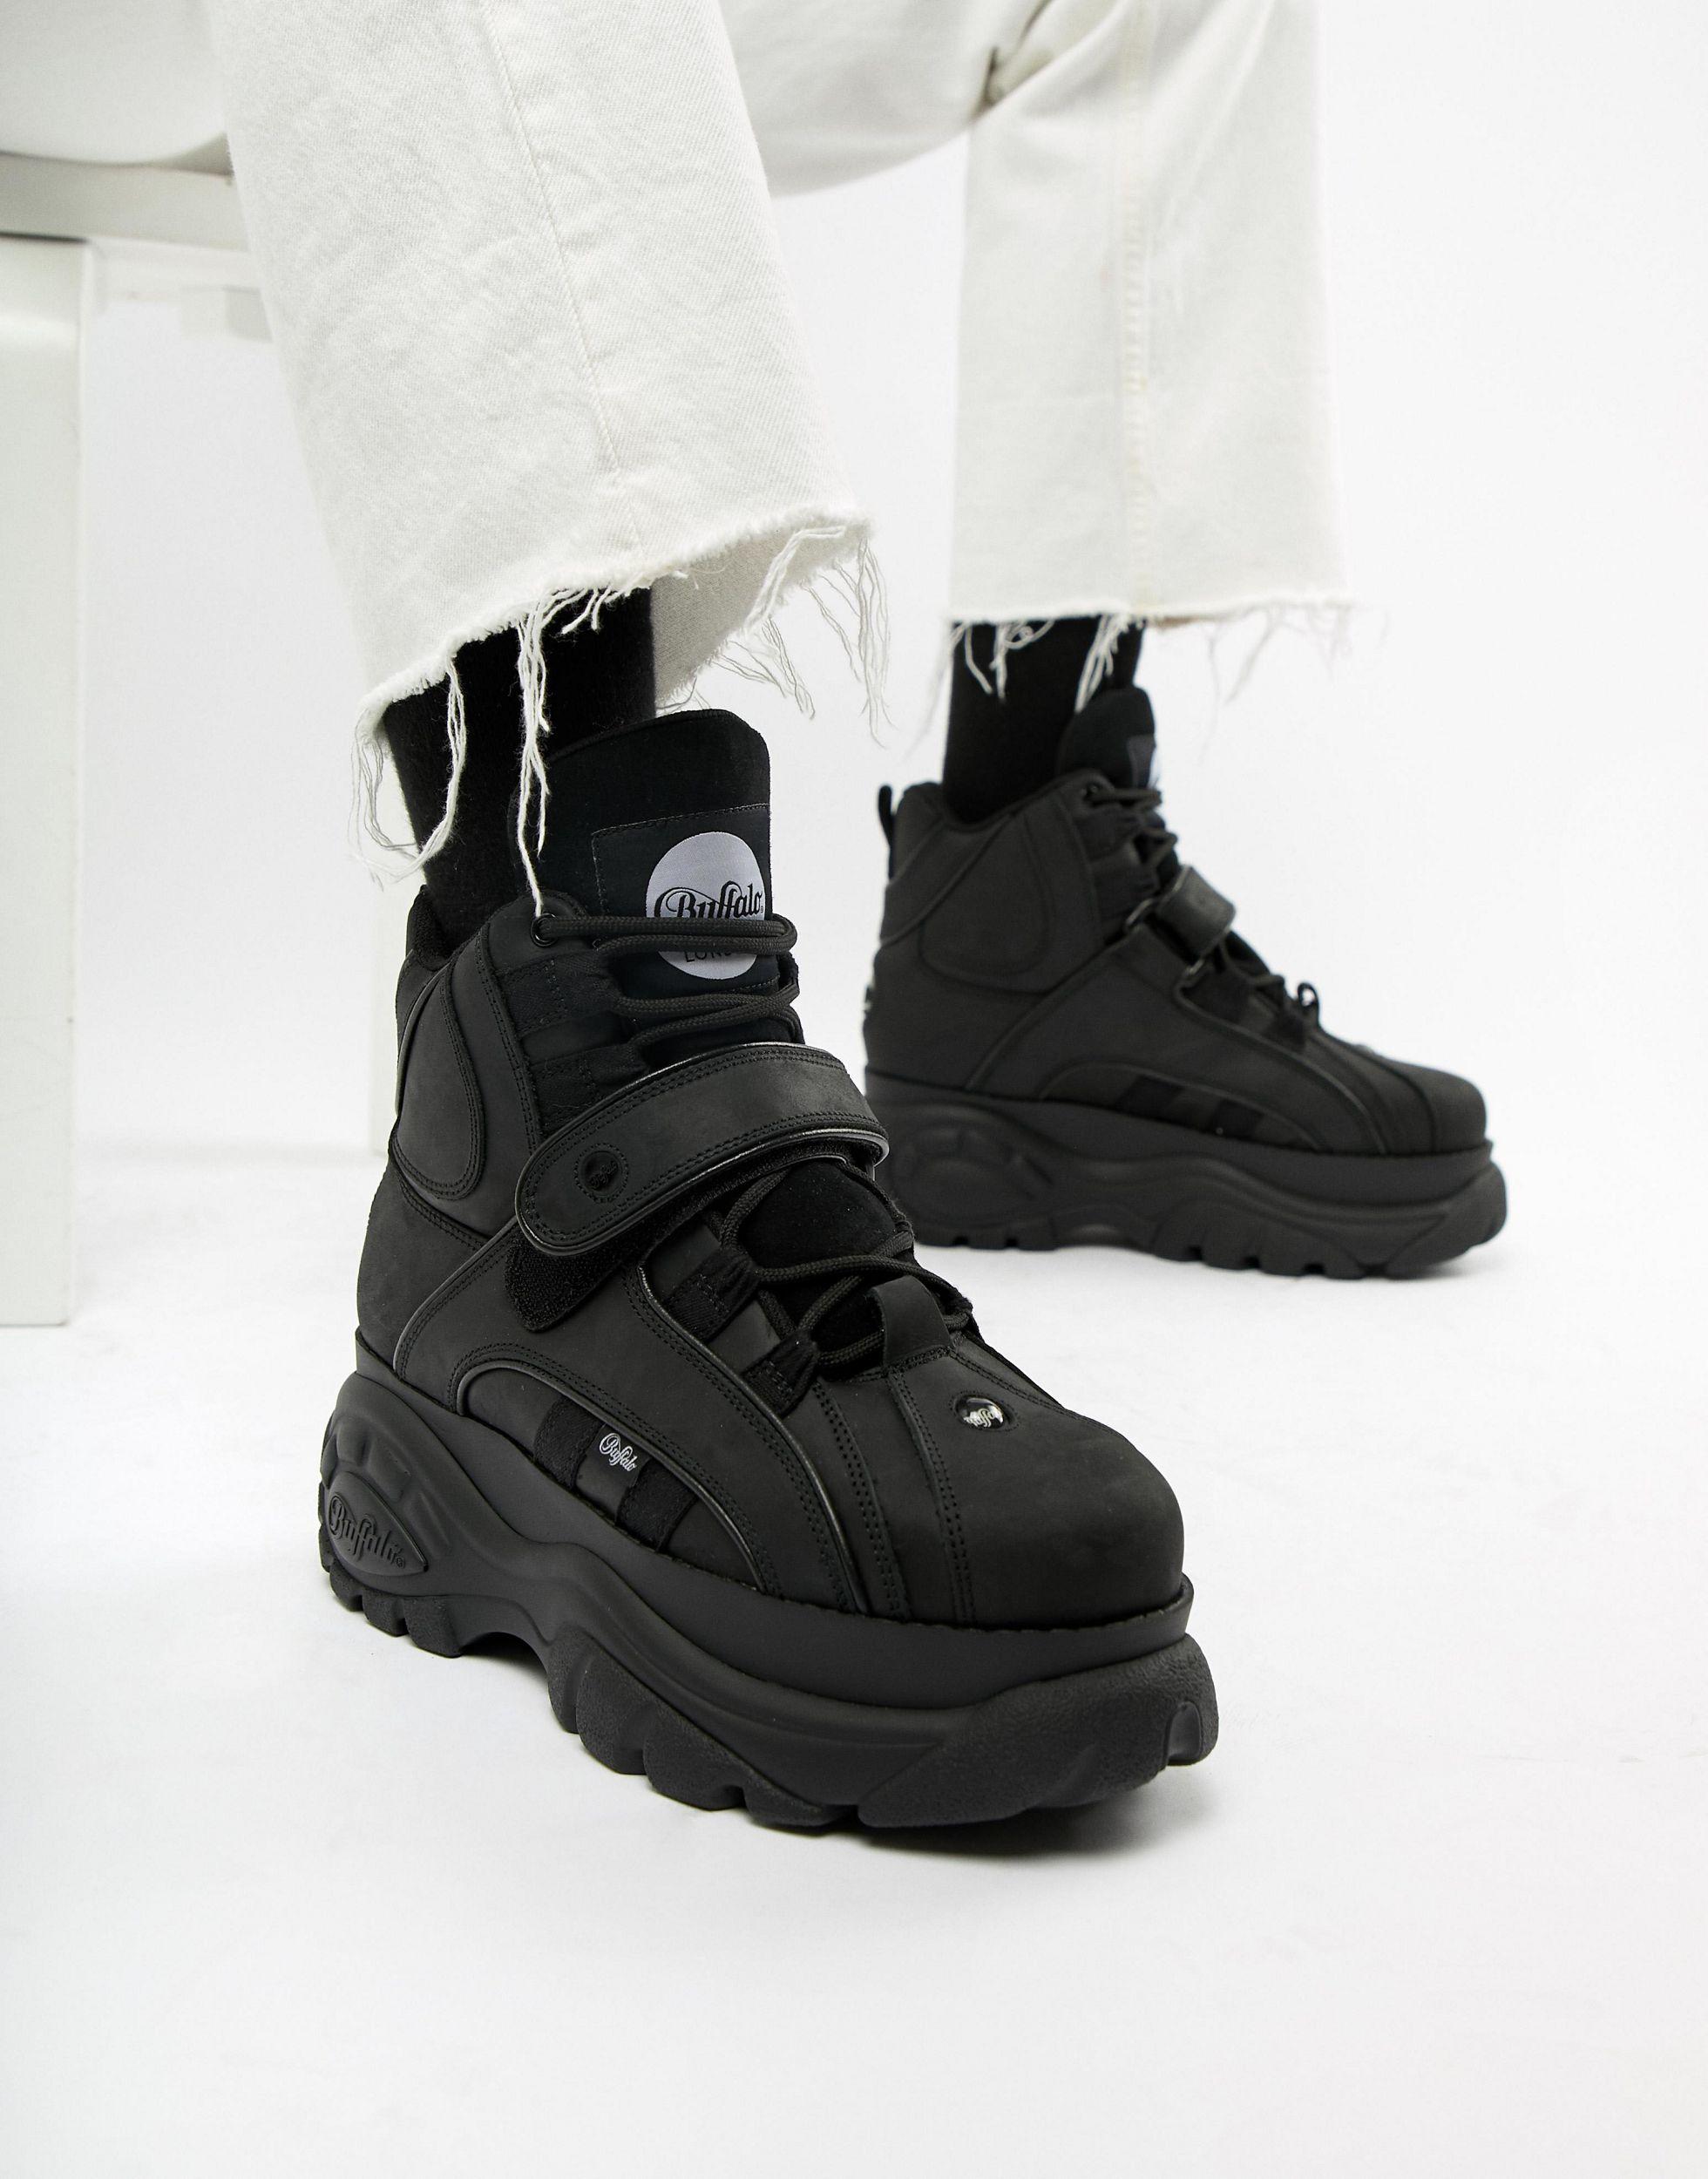 Buffalo Classic Hi Top Chunky Sole Trainers in Black for Men | Lyst